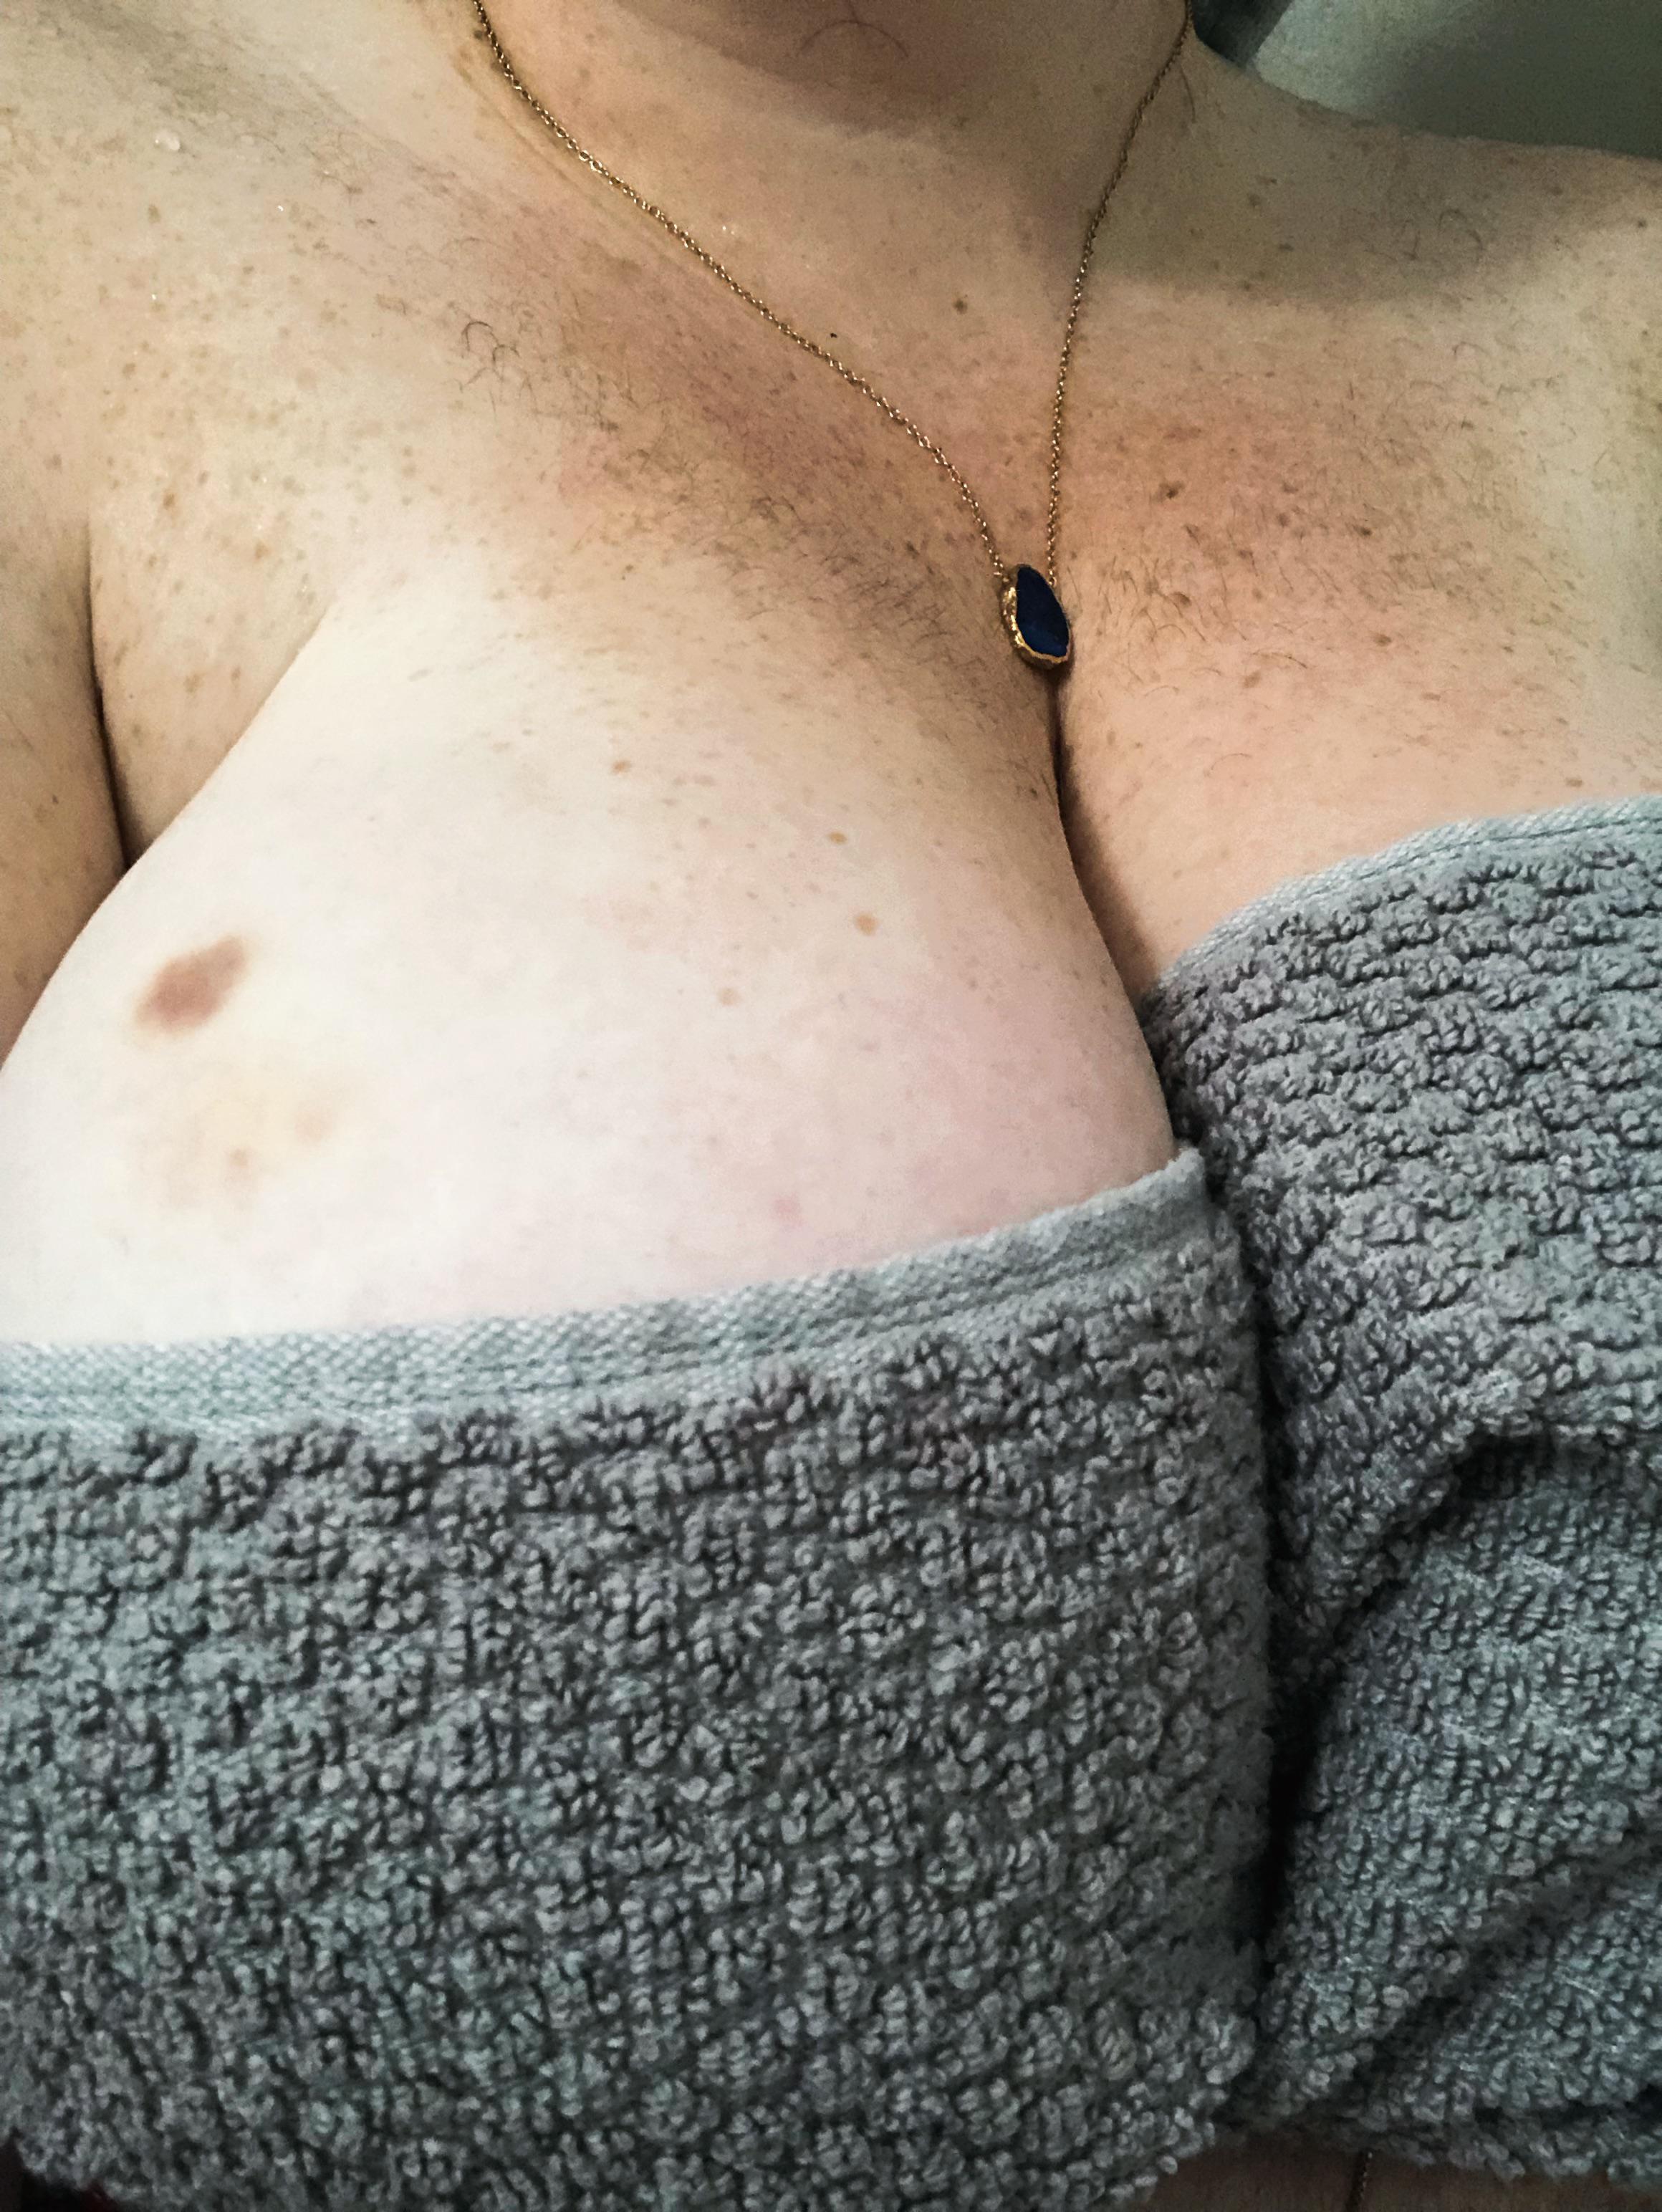 Accidentally bruised my boob — kiss it and make it feel better? 😈 Link in  comments 👅 - Thick White Girls - HAPPY BOOTY